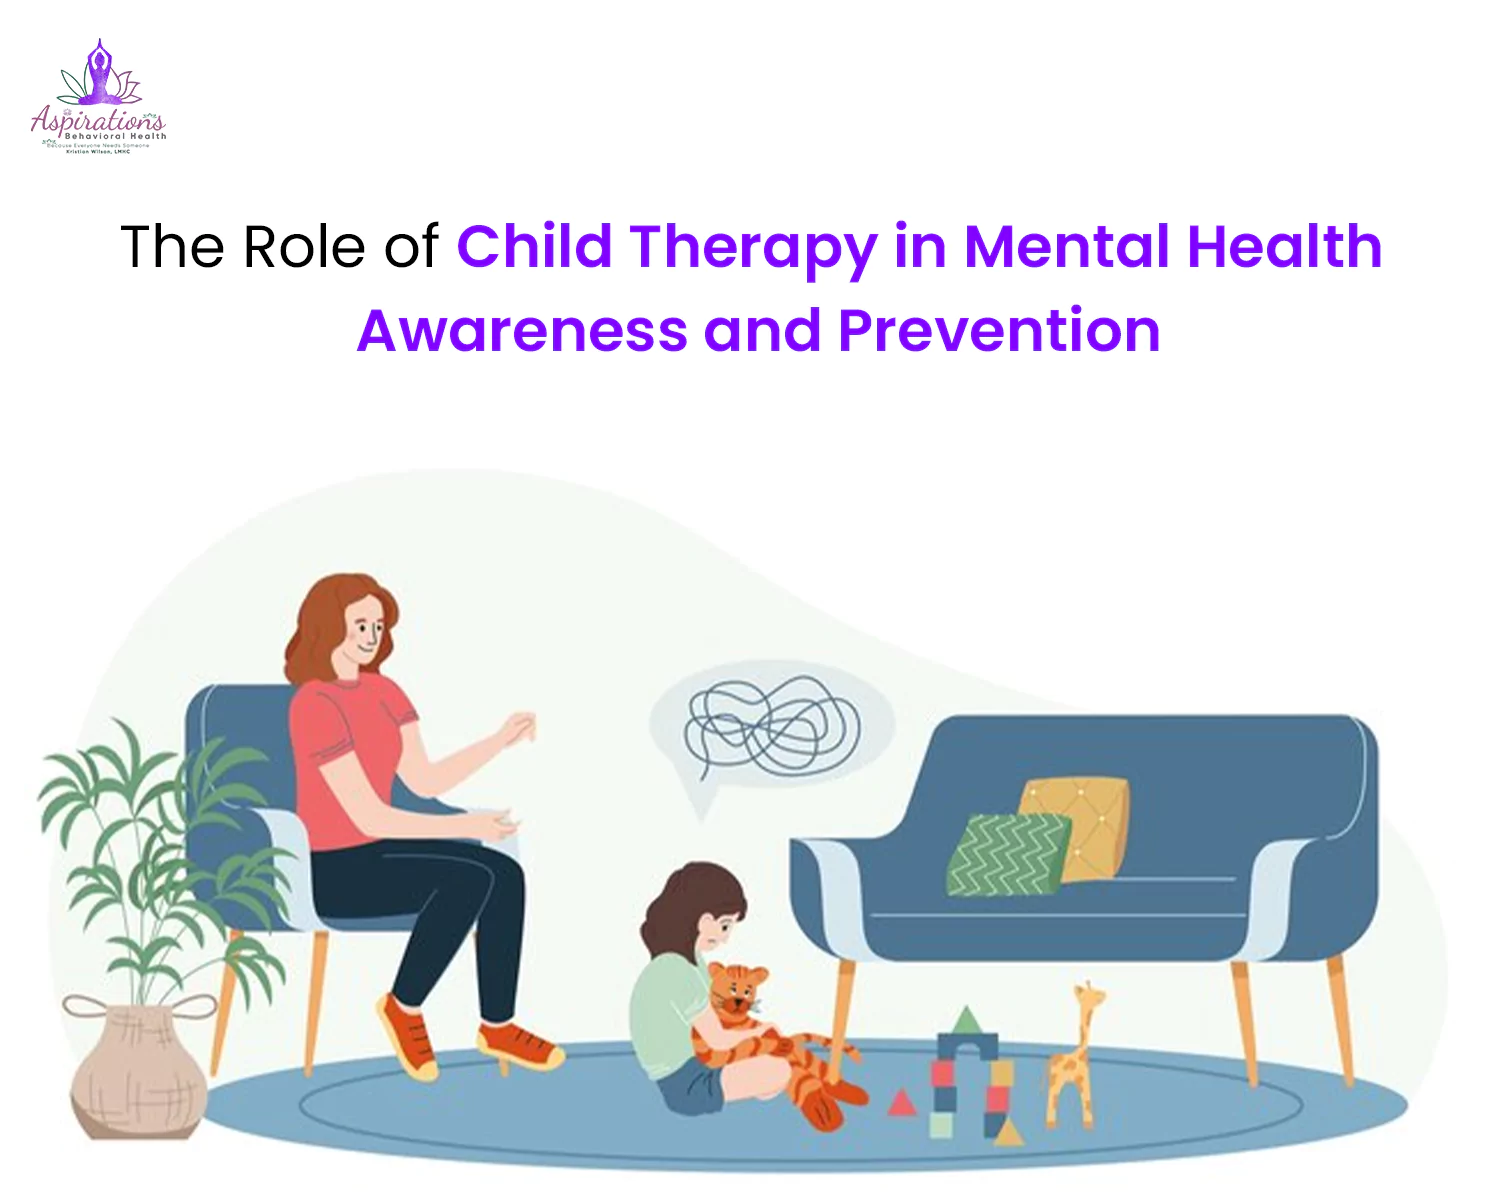 The Role of Child Therapy in Mental Health Awareness and Prevention